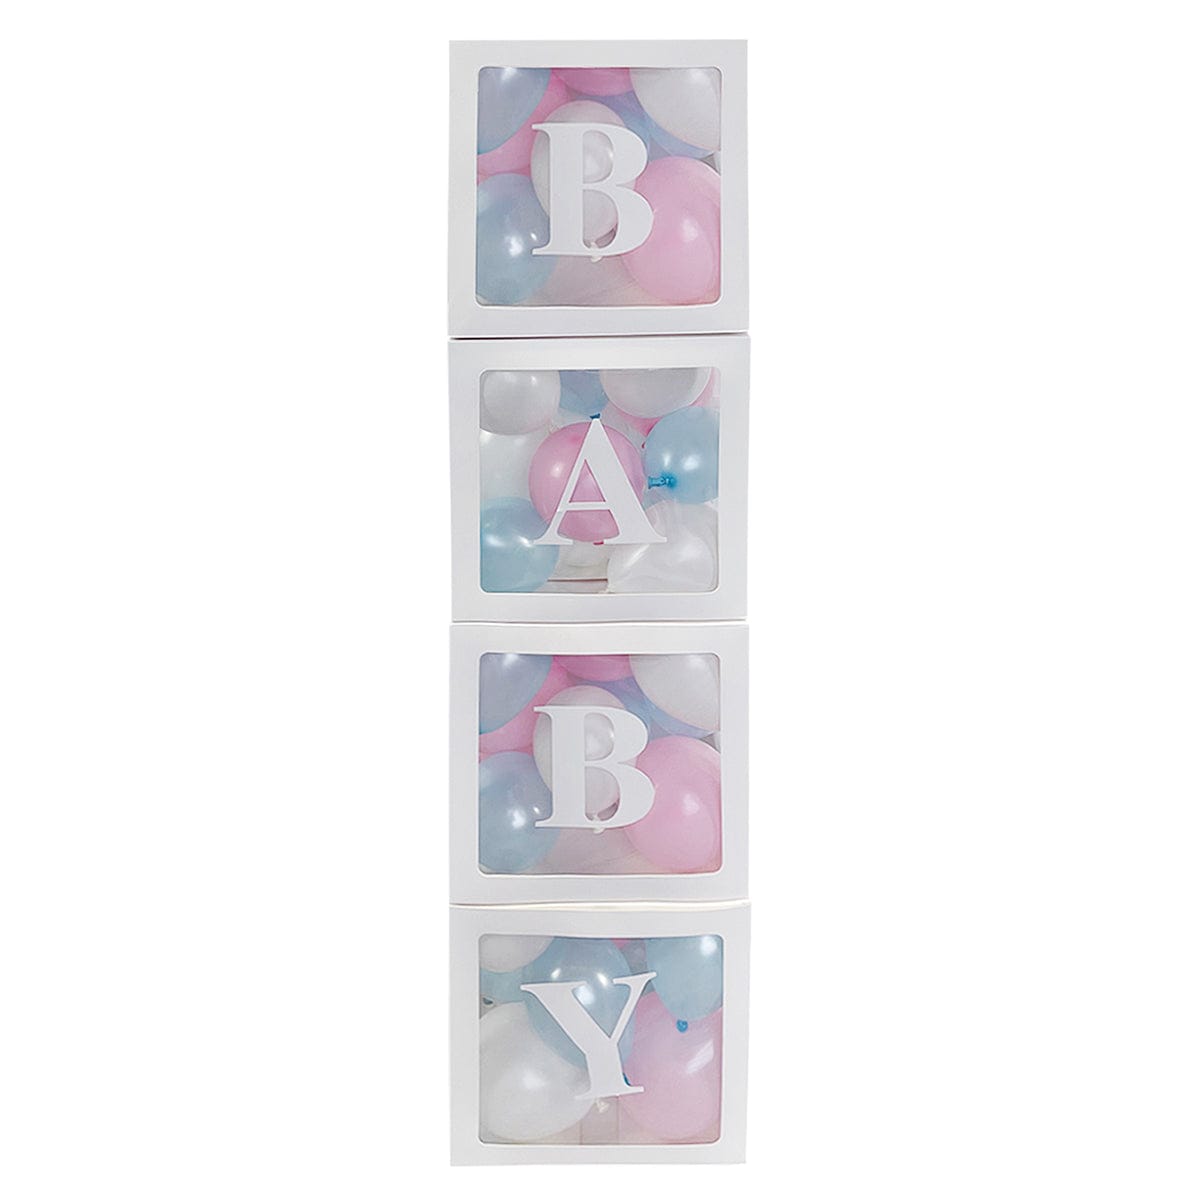 Yiwu PaiJing Import & Export Co., Ltd Baby Shower White Clear Balloon Boxes with "Baby" Letters, 4 Count